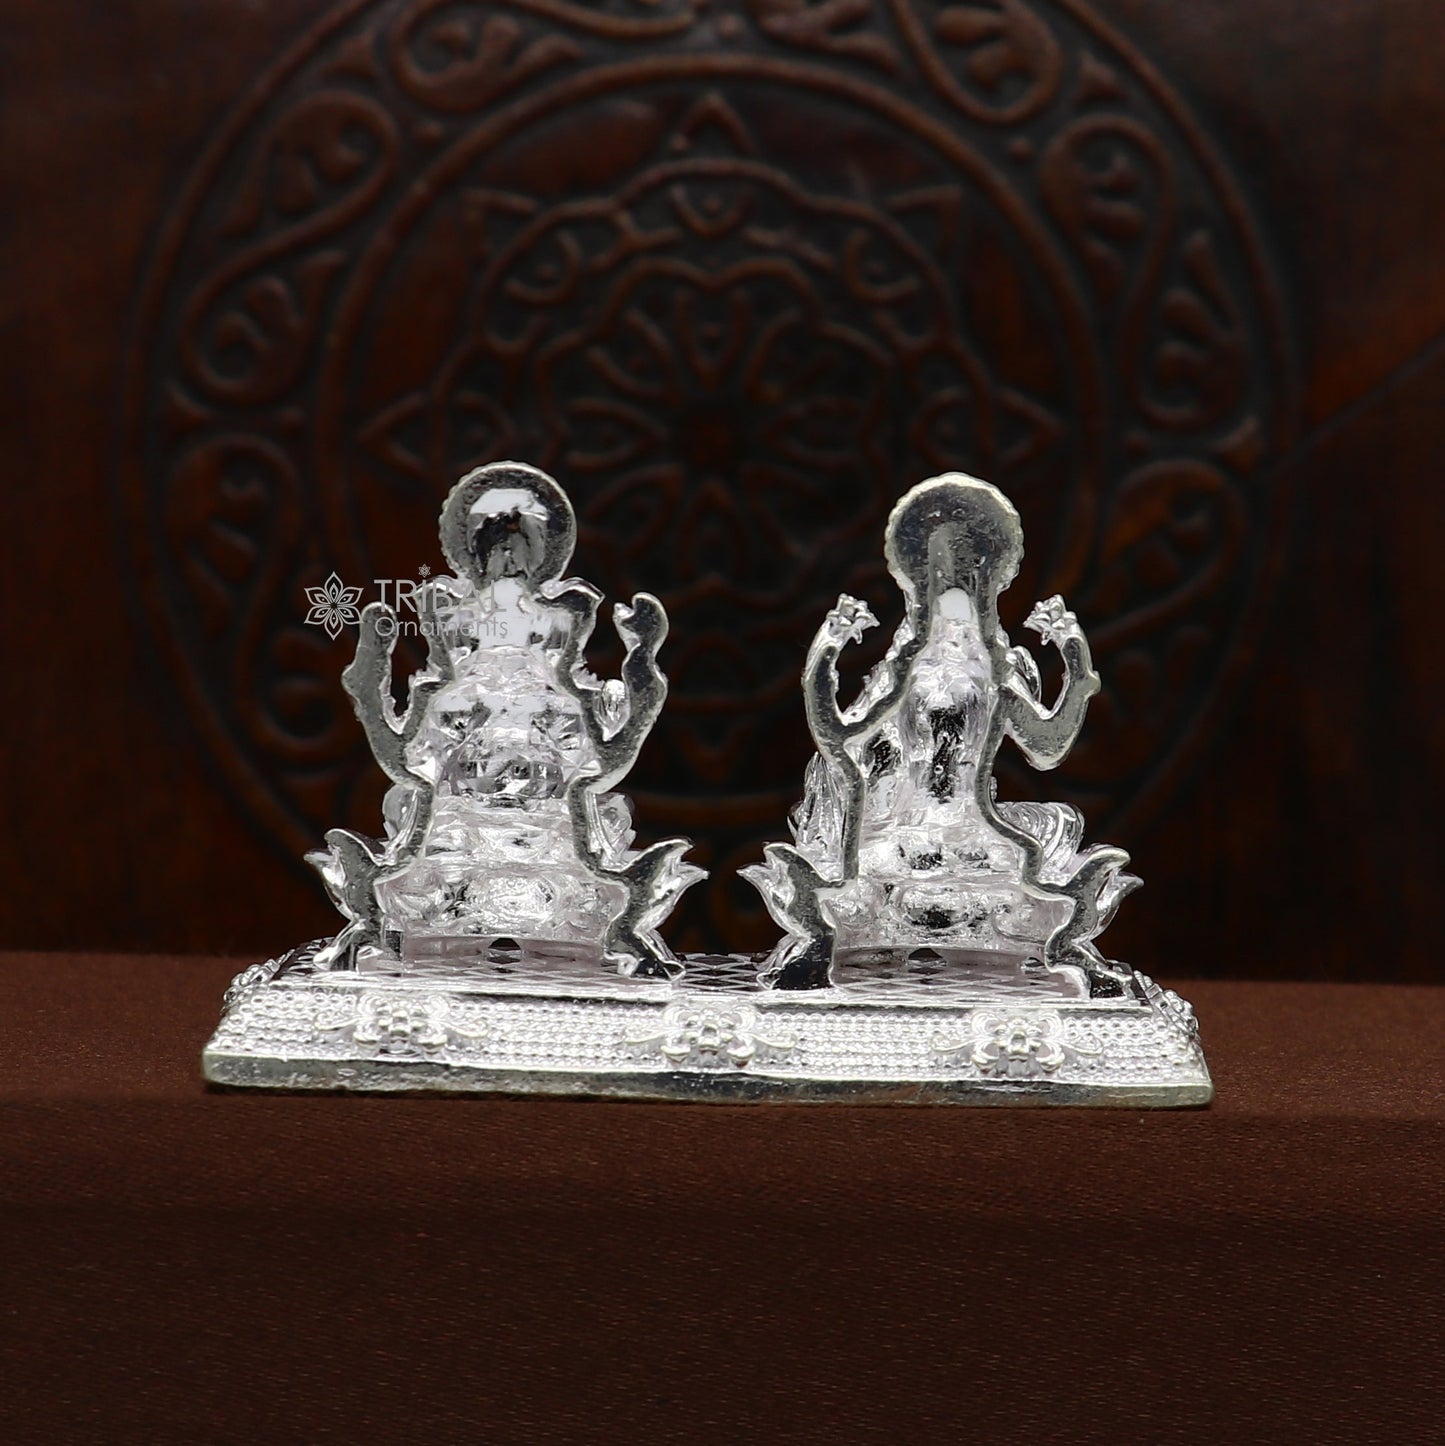 1.3" 925 Sterling silver Lakshmi and Ganesha statue, puja article figurine, Diwali puja brings joy, hope, and wealth to the owners art747 - TRIBAL ORNAMENTS